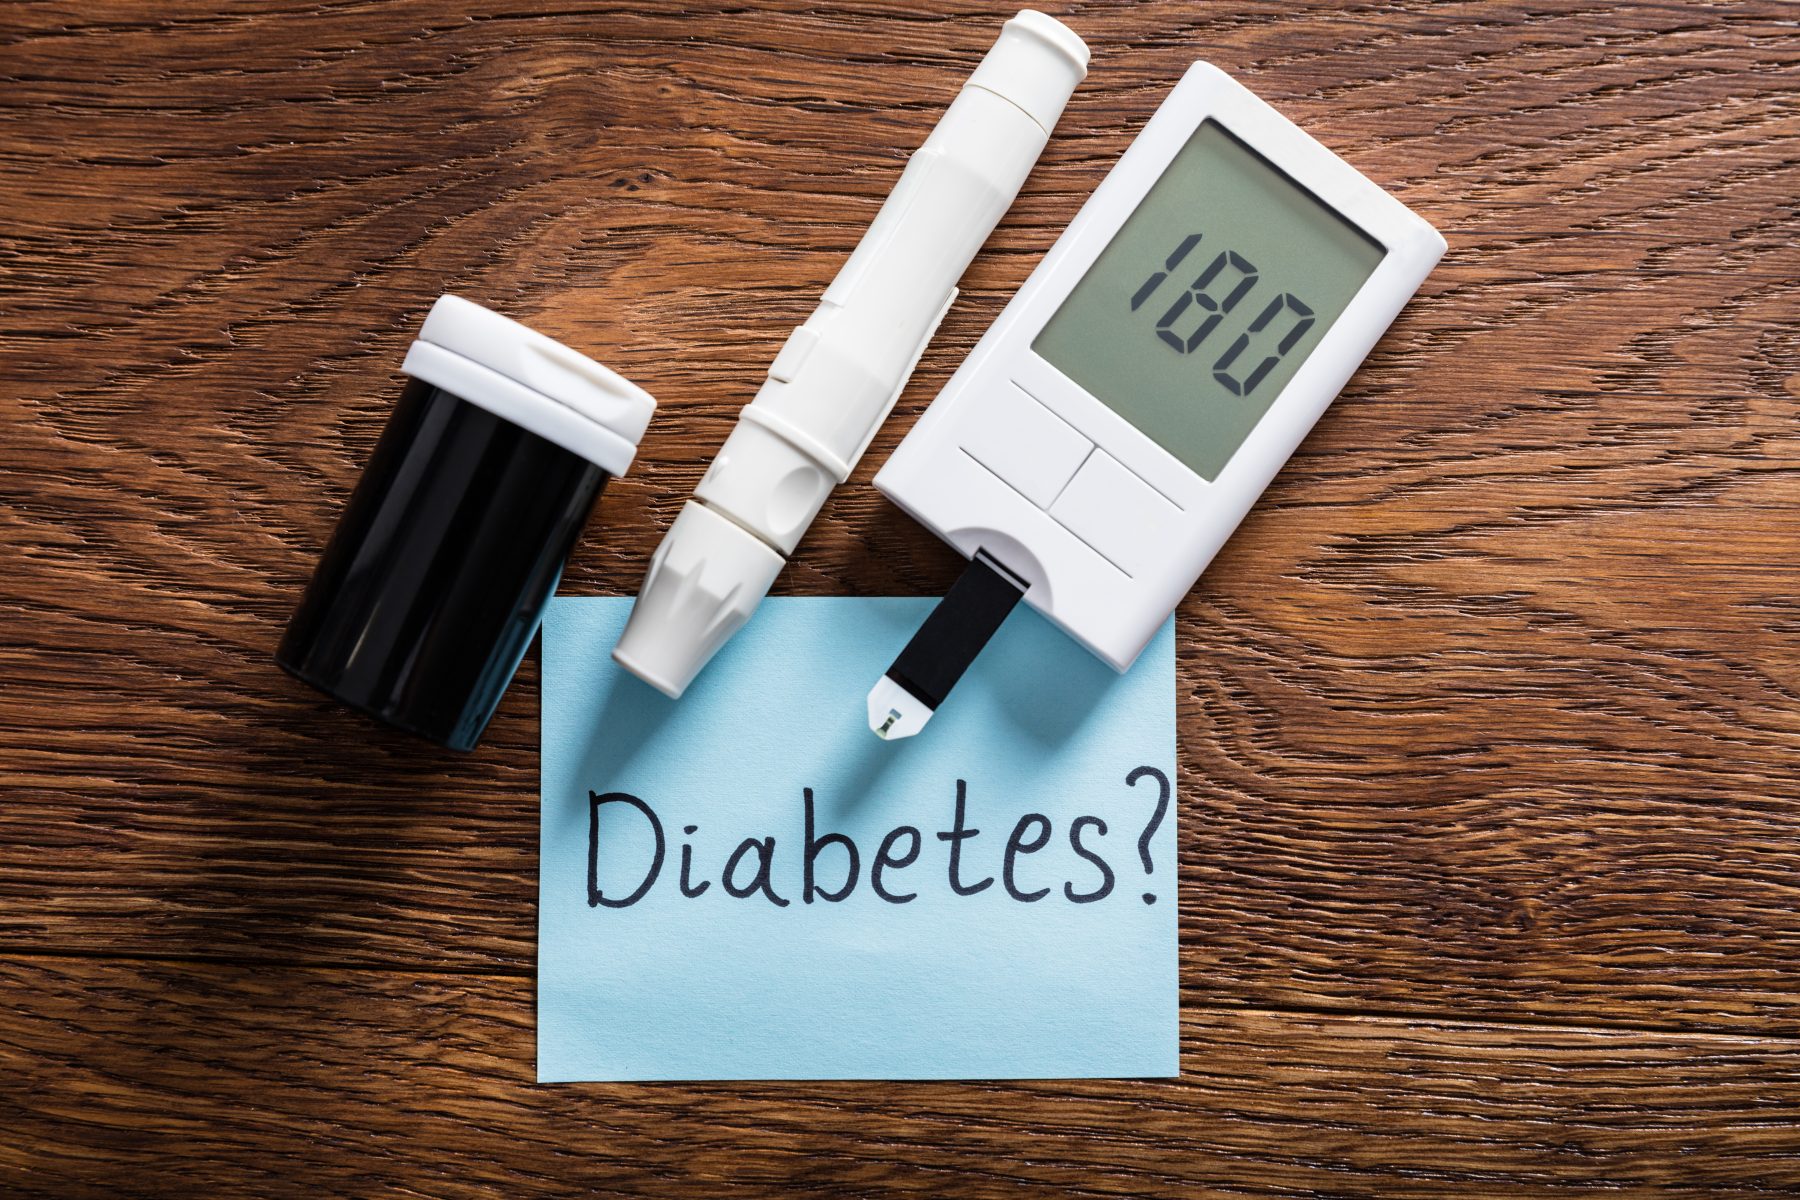 Diabetes testing and treatment devices